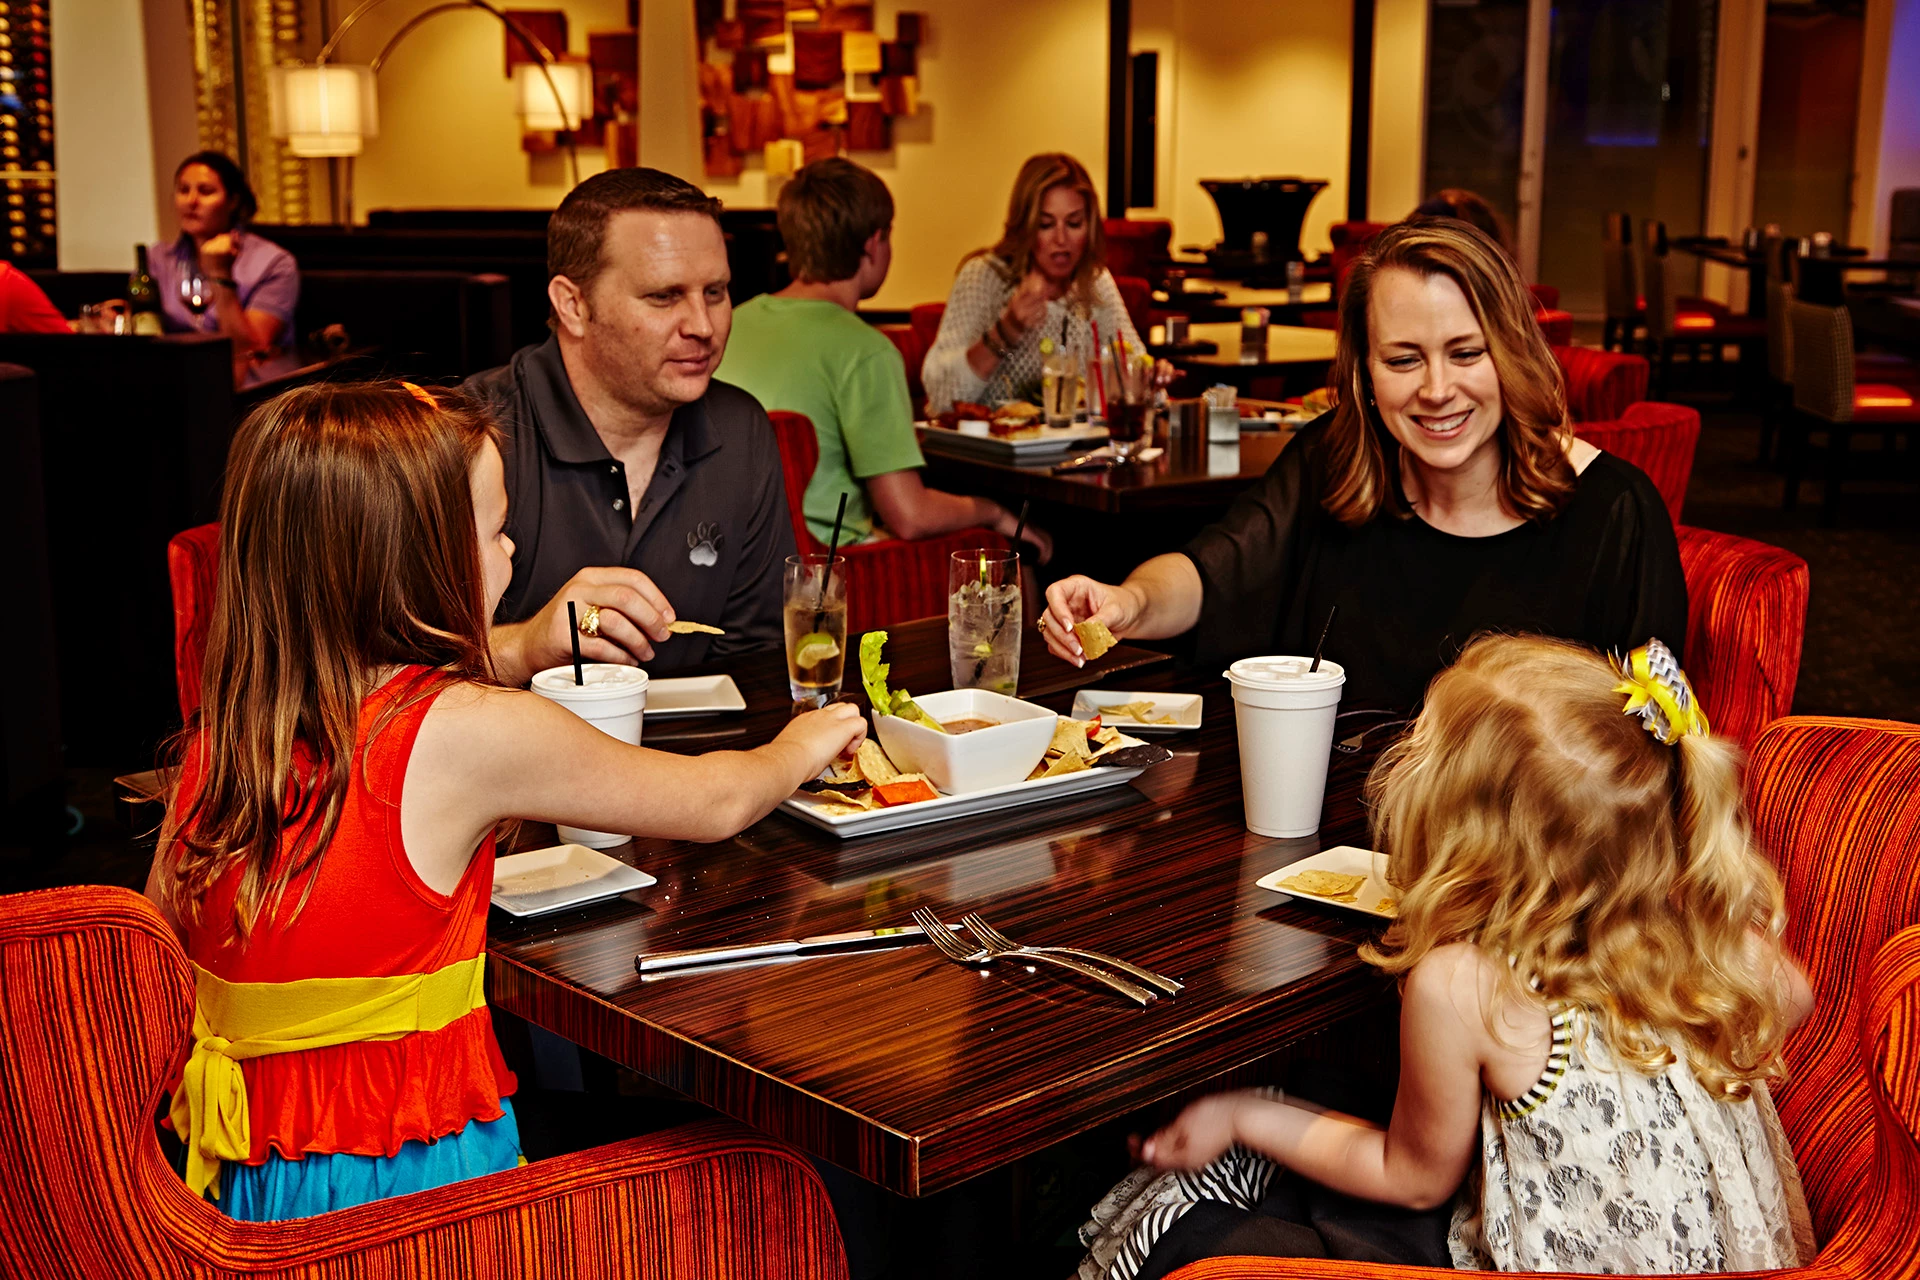 The Clubs of Prestonwood - Family Dining